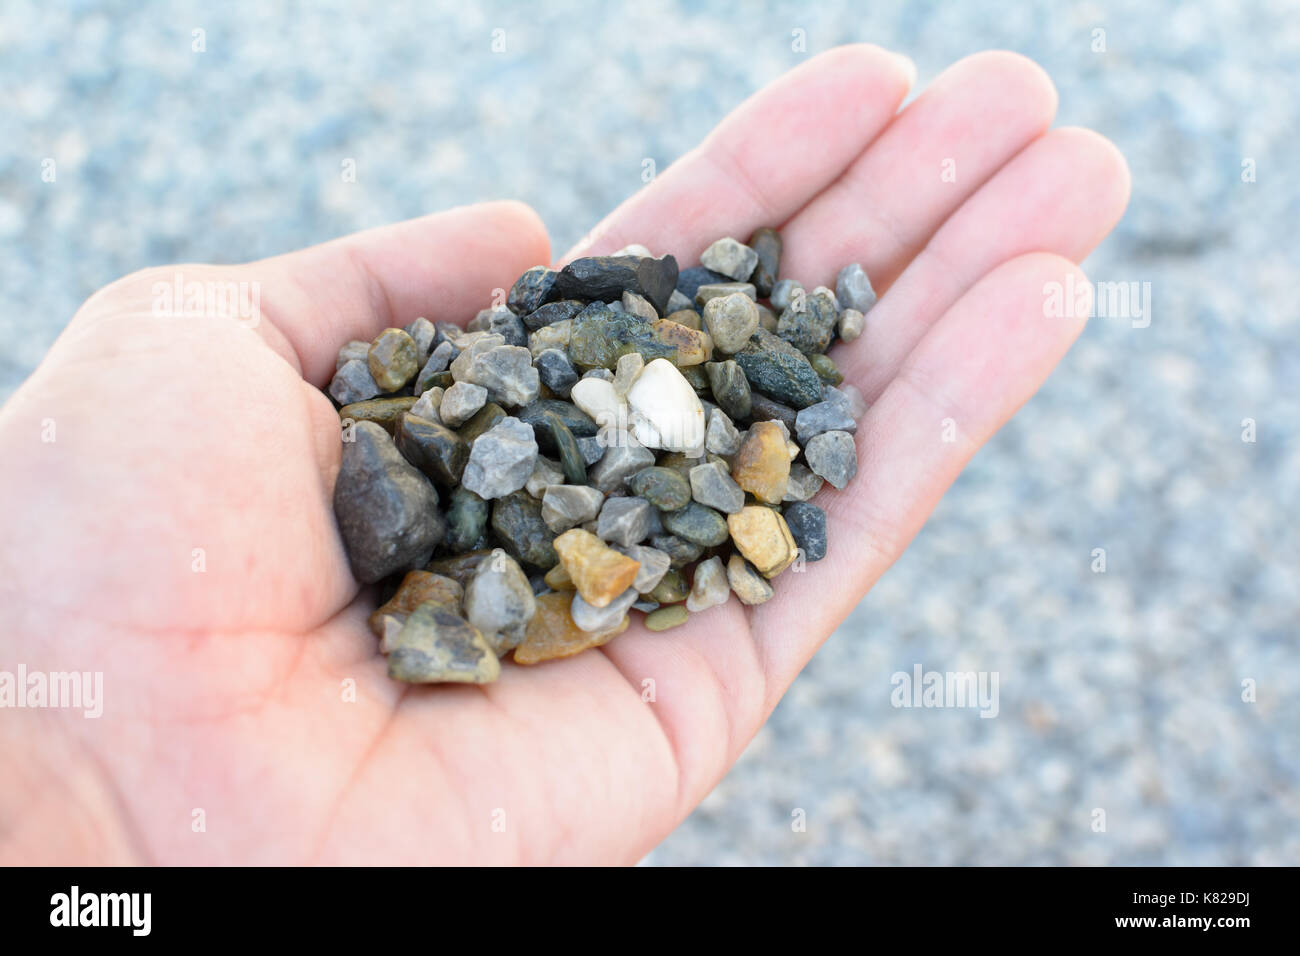 take in hand a set of gravel stones Stock Photo